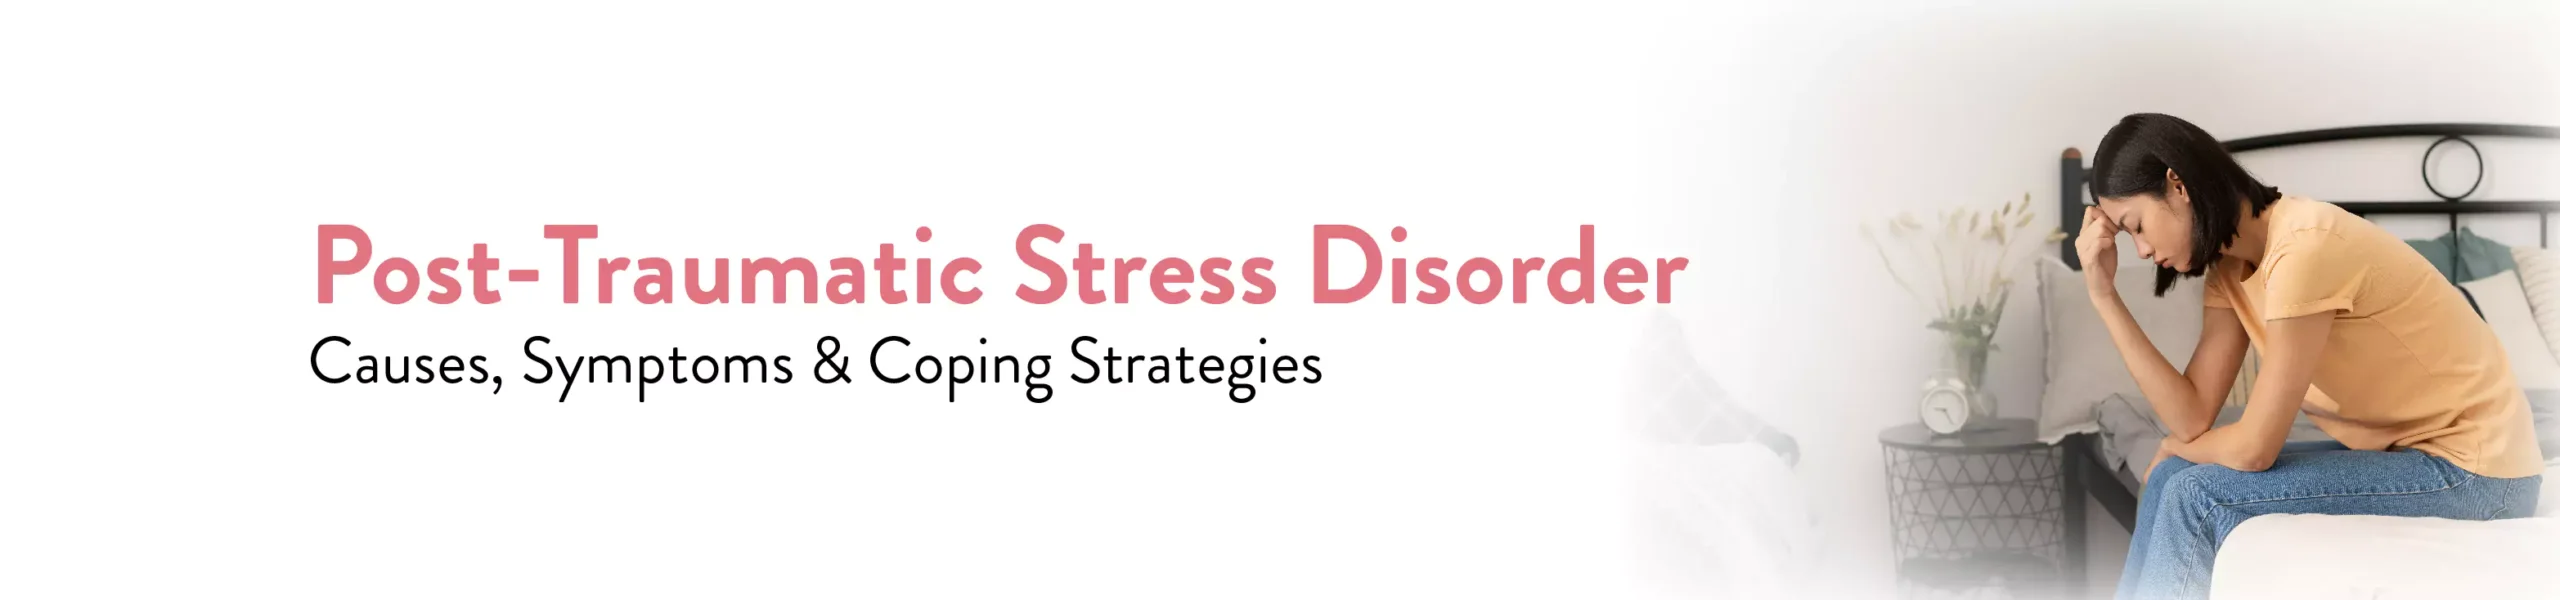 post traumatic stress disorder causes symptoms and treatment